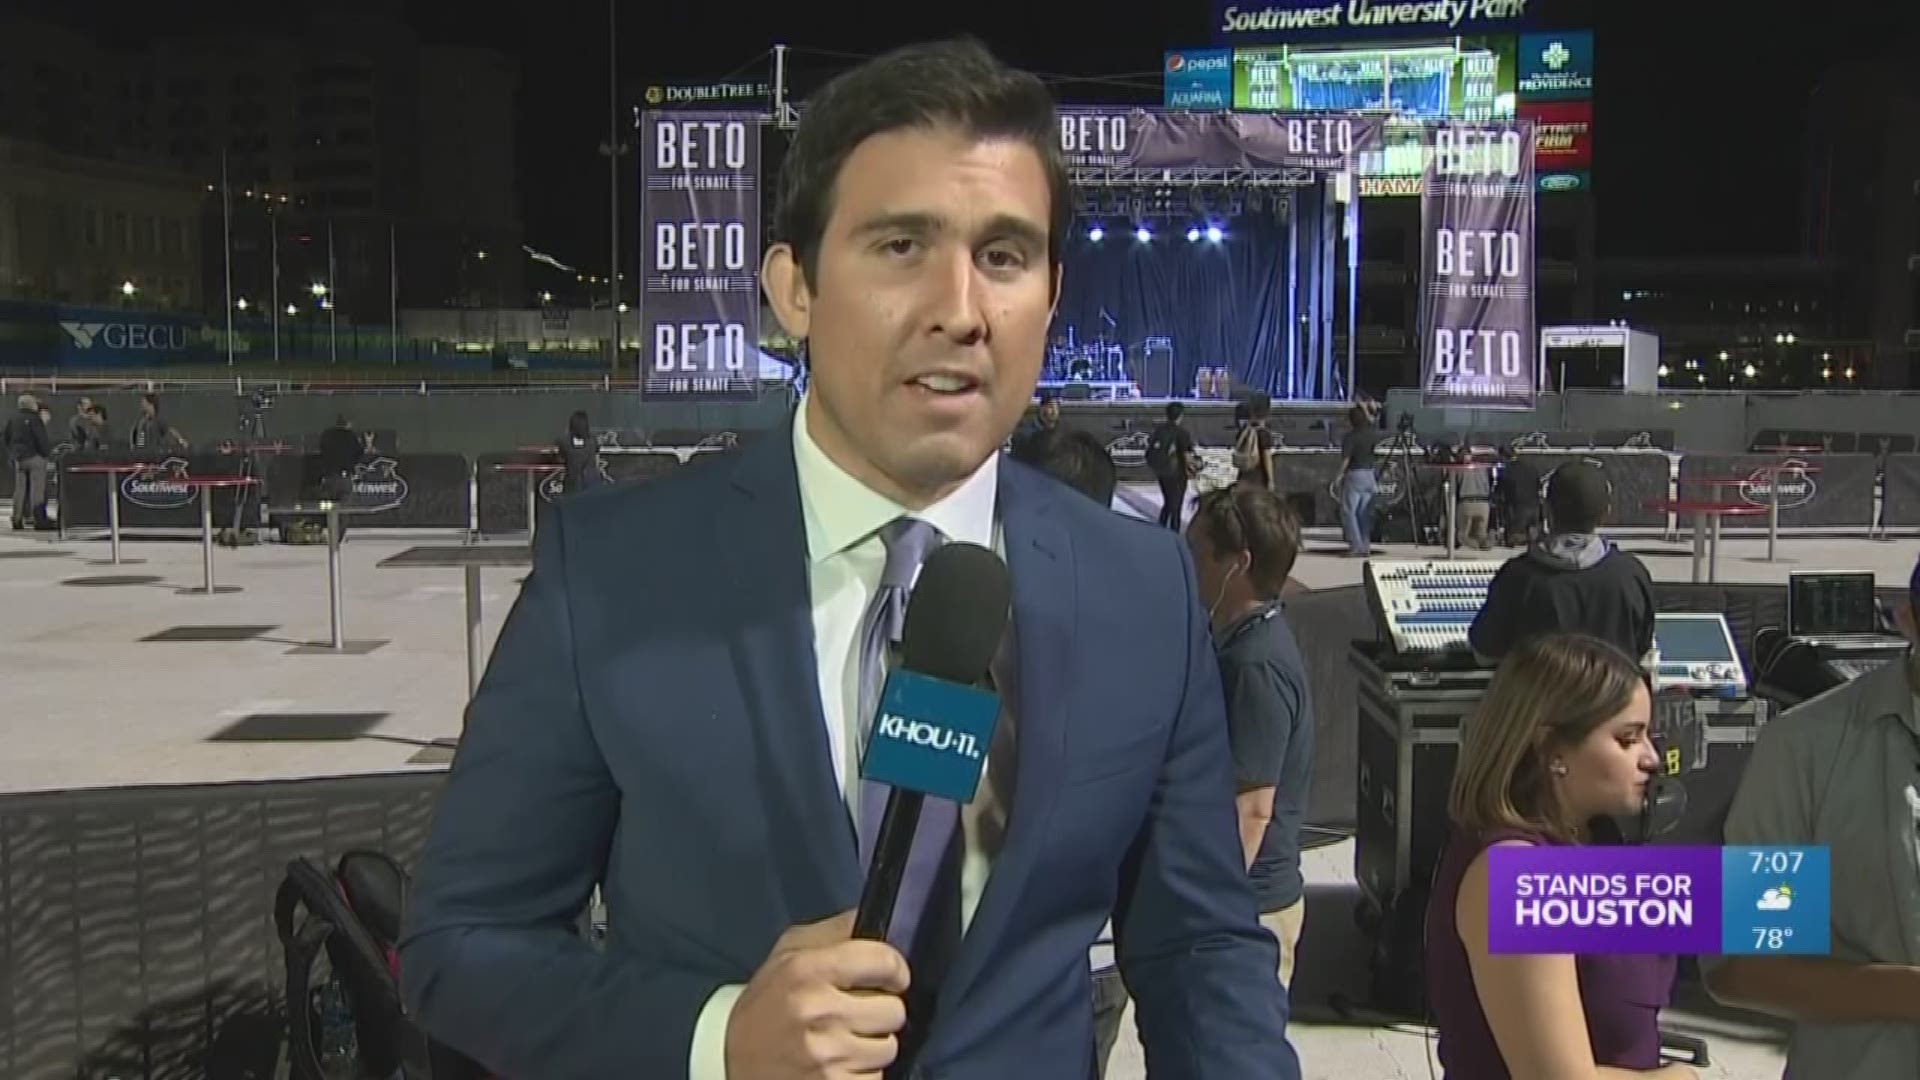 Beto O'Rourke is hosting his campaign party at the Triple A Ballpark in El Paso. The campaign expects several thousands people to attend. His campaign said they are very optimistic about the results.